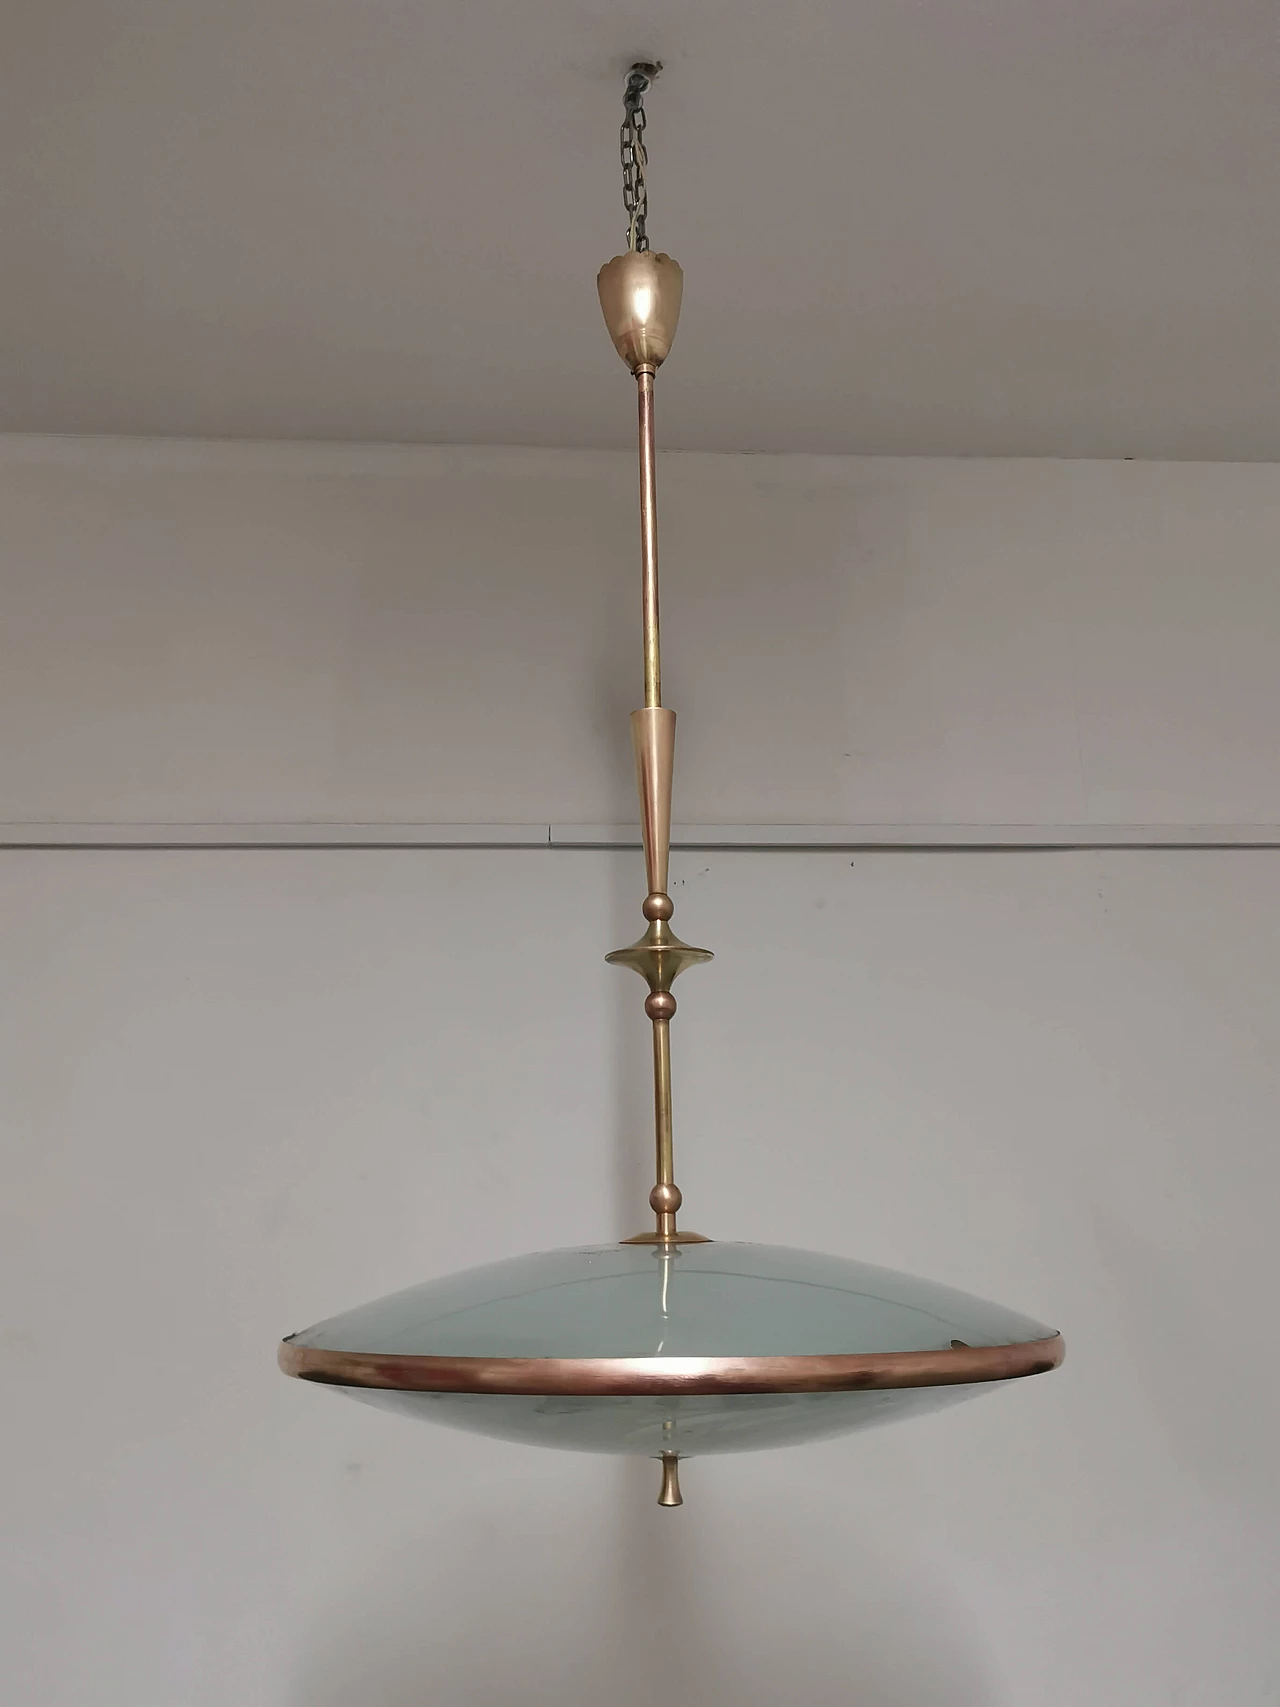 Suspension lamp by Pietro Chiesa for Fontana Arte, 1940s 1372291